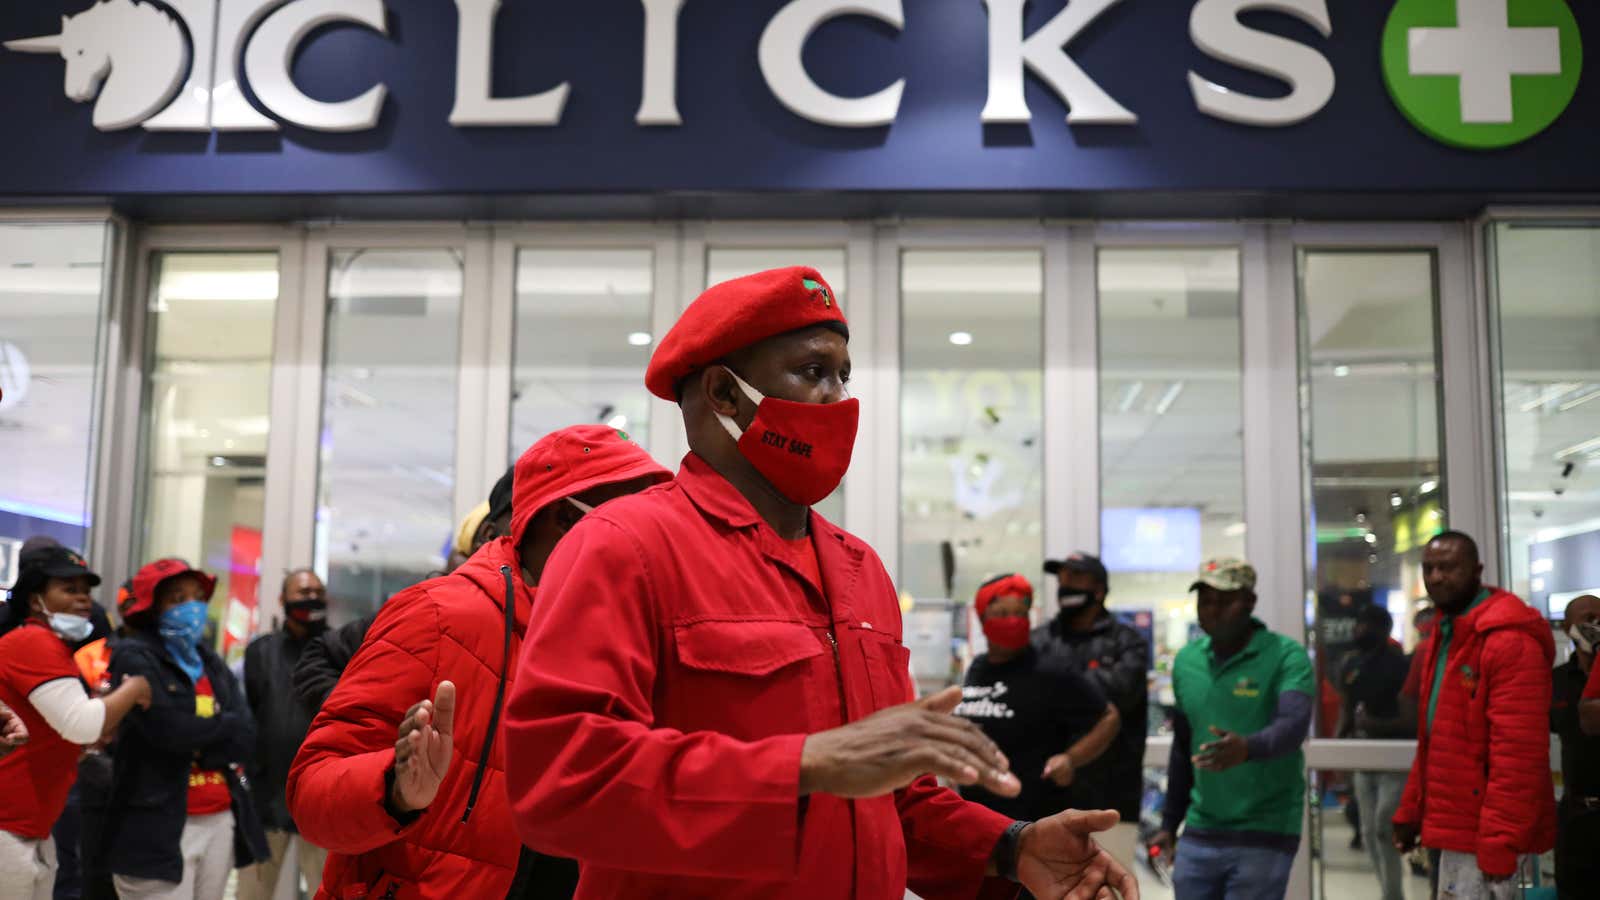 Members of the opposition Economic Freedom Front (EFF) protest outside a branch of drug store chain Clicks in Johannesburg, South Africa, Sept. 7.